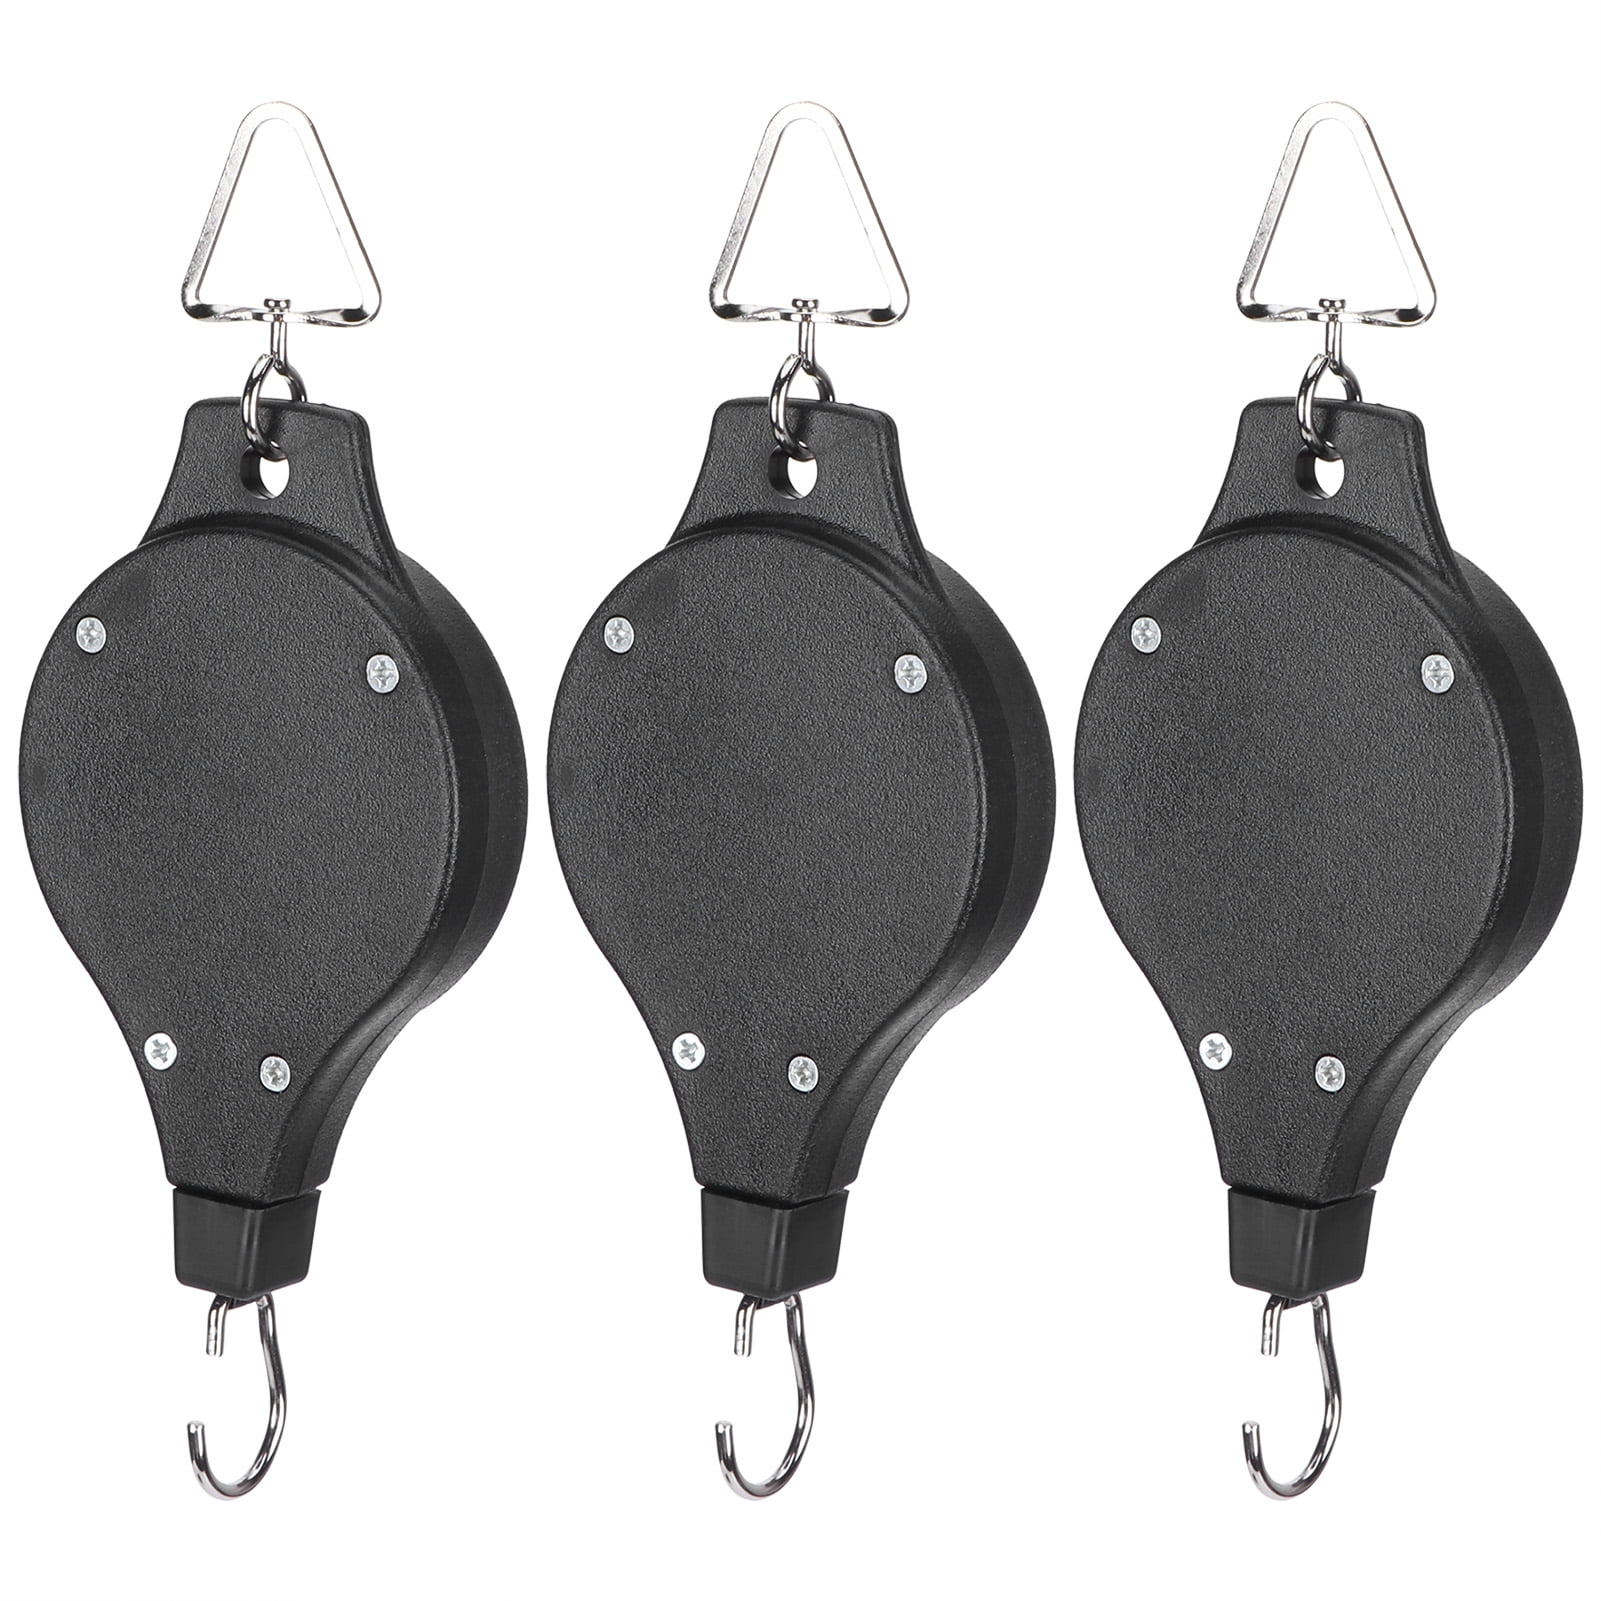 2pc Set Plant Pulley Retractable Hanger Adjustable Height Easy Reach Hook 